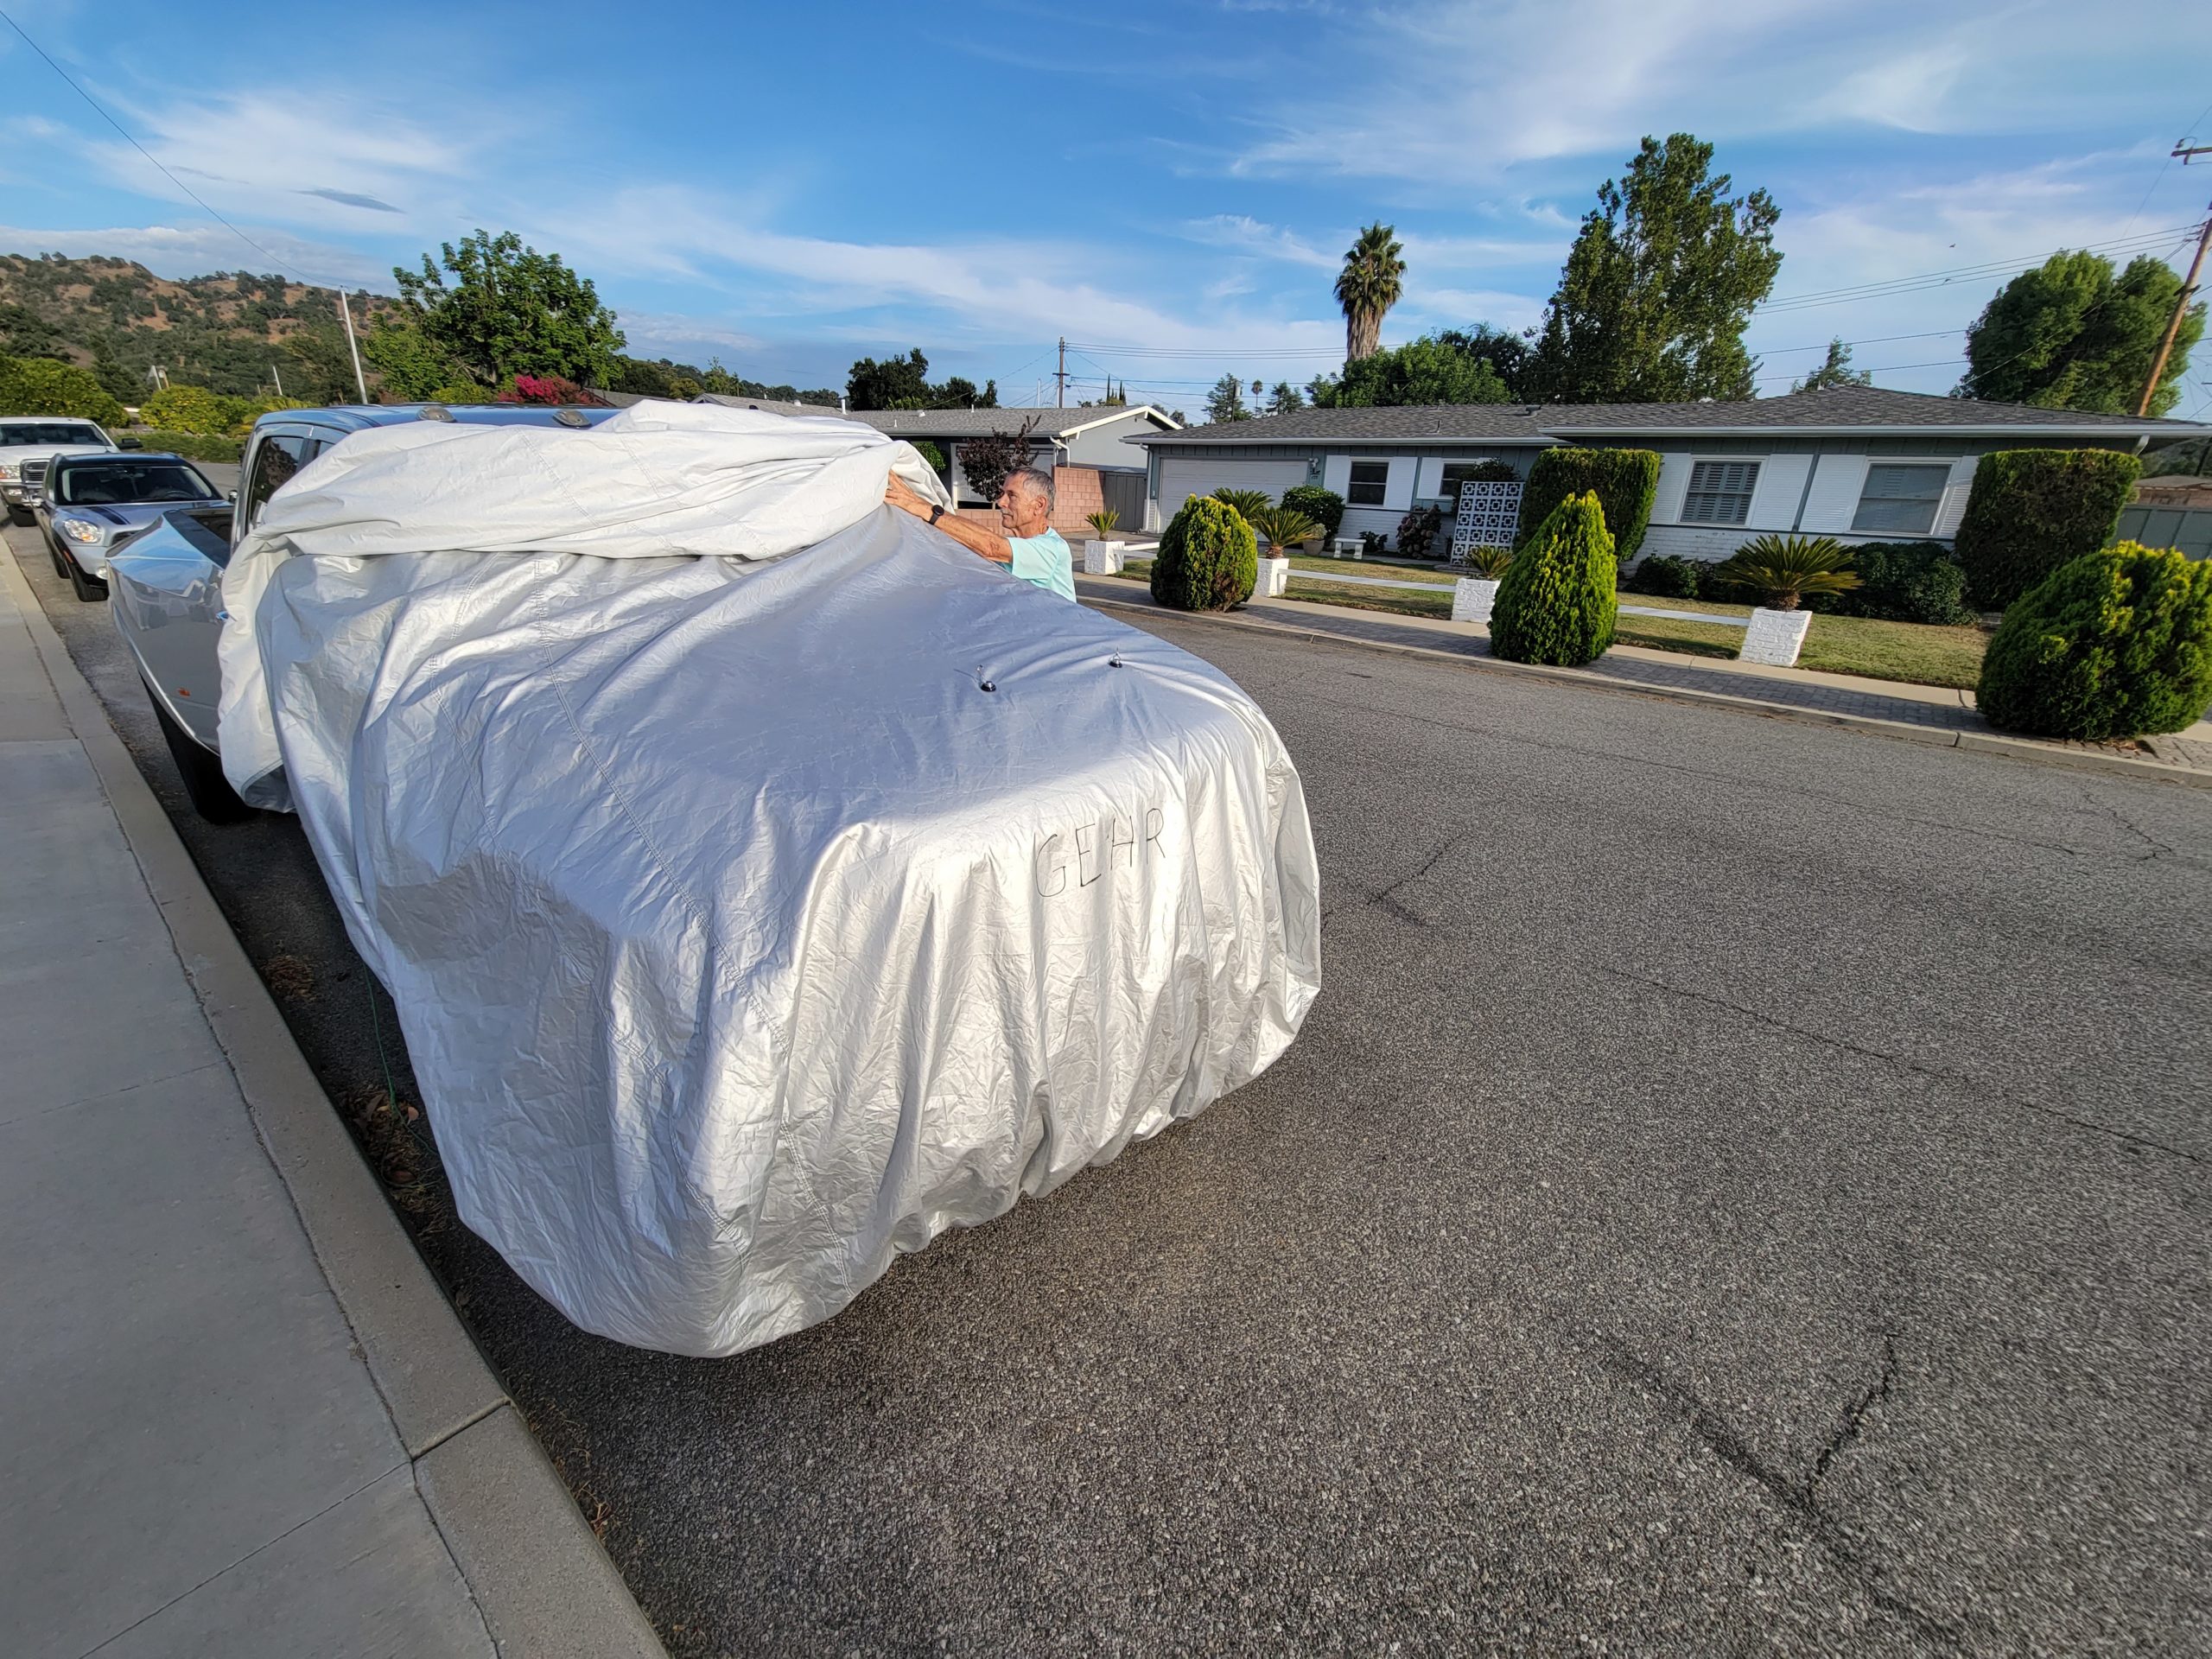 technician rolls out the rear portion of the car cover while the front is held with magnets